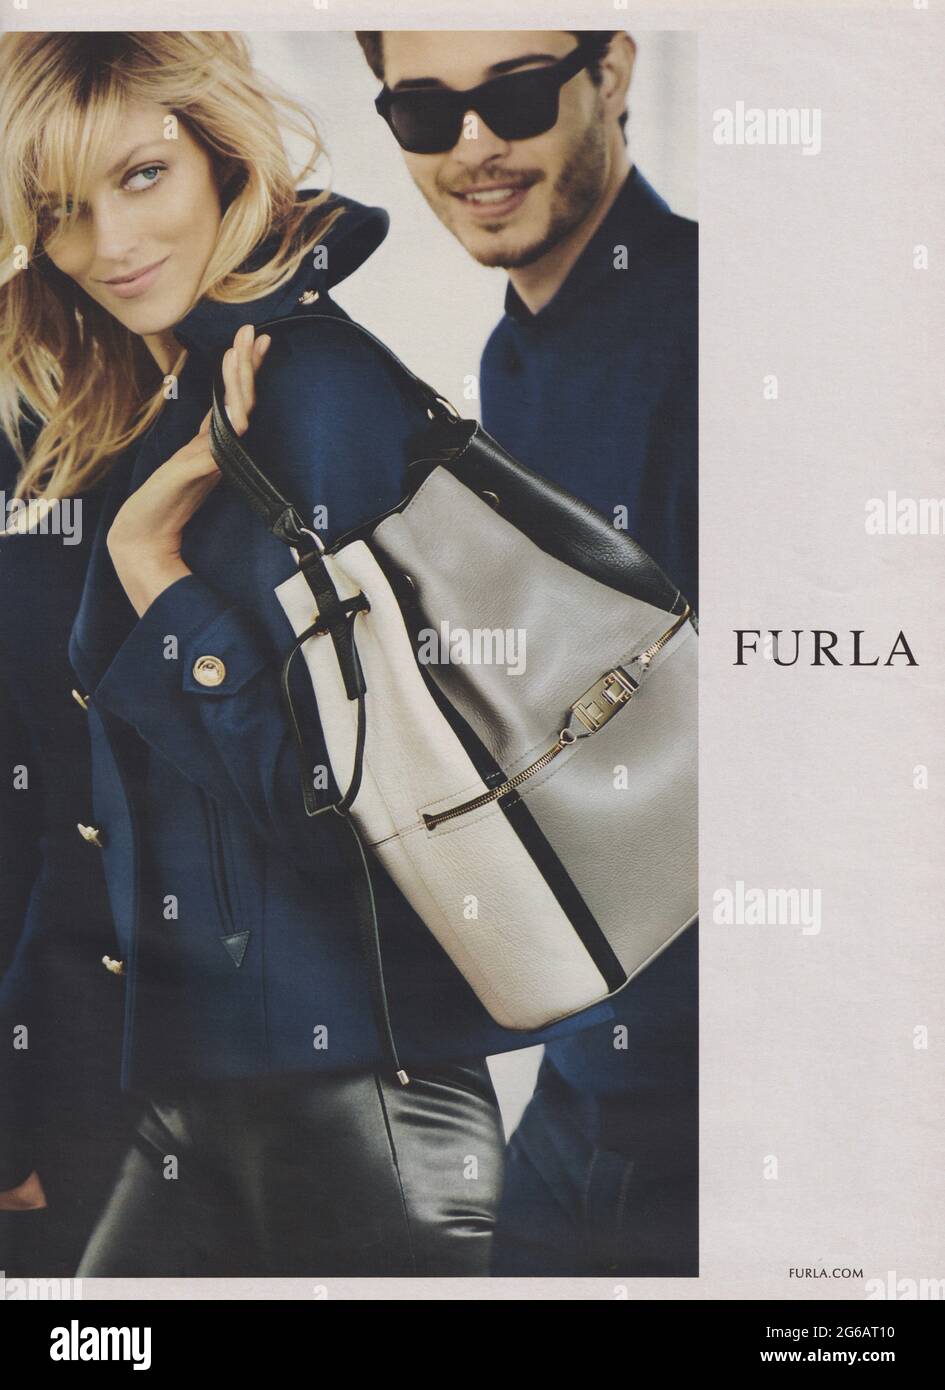 poster advertising Furla fashion house with ANJA RUBIK in paper magazine from 2015 year, advertisement, creative Furla advert from 2010s Stock Photo